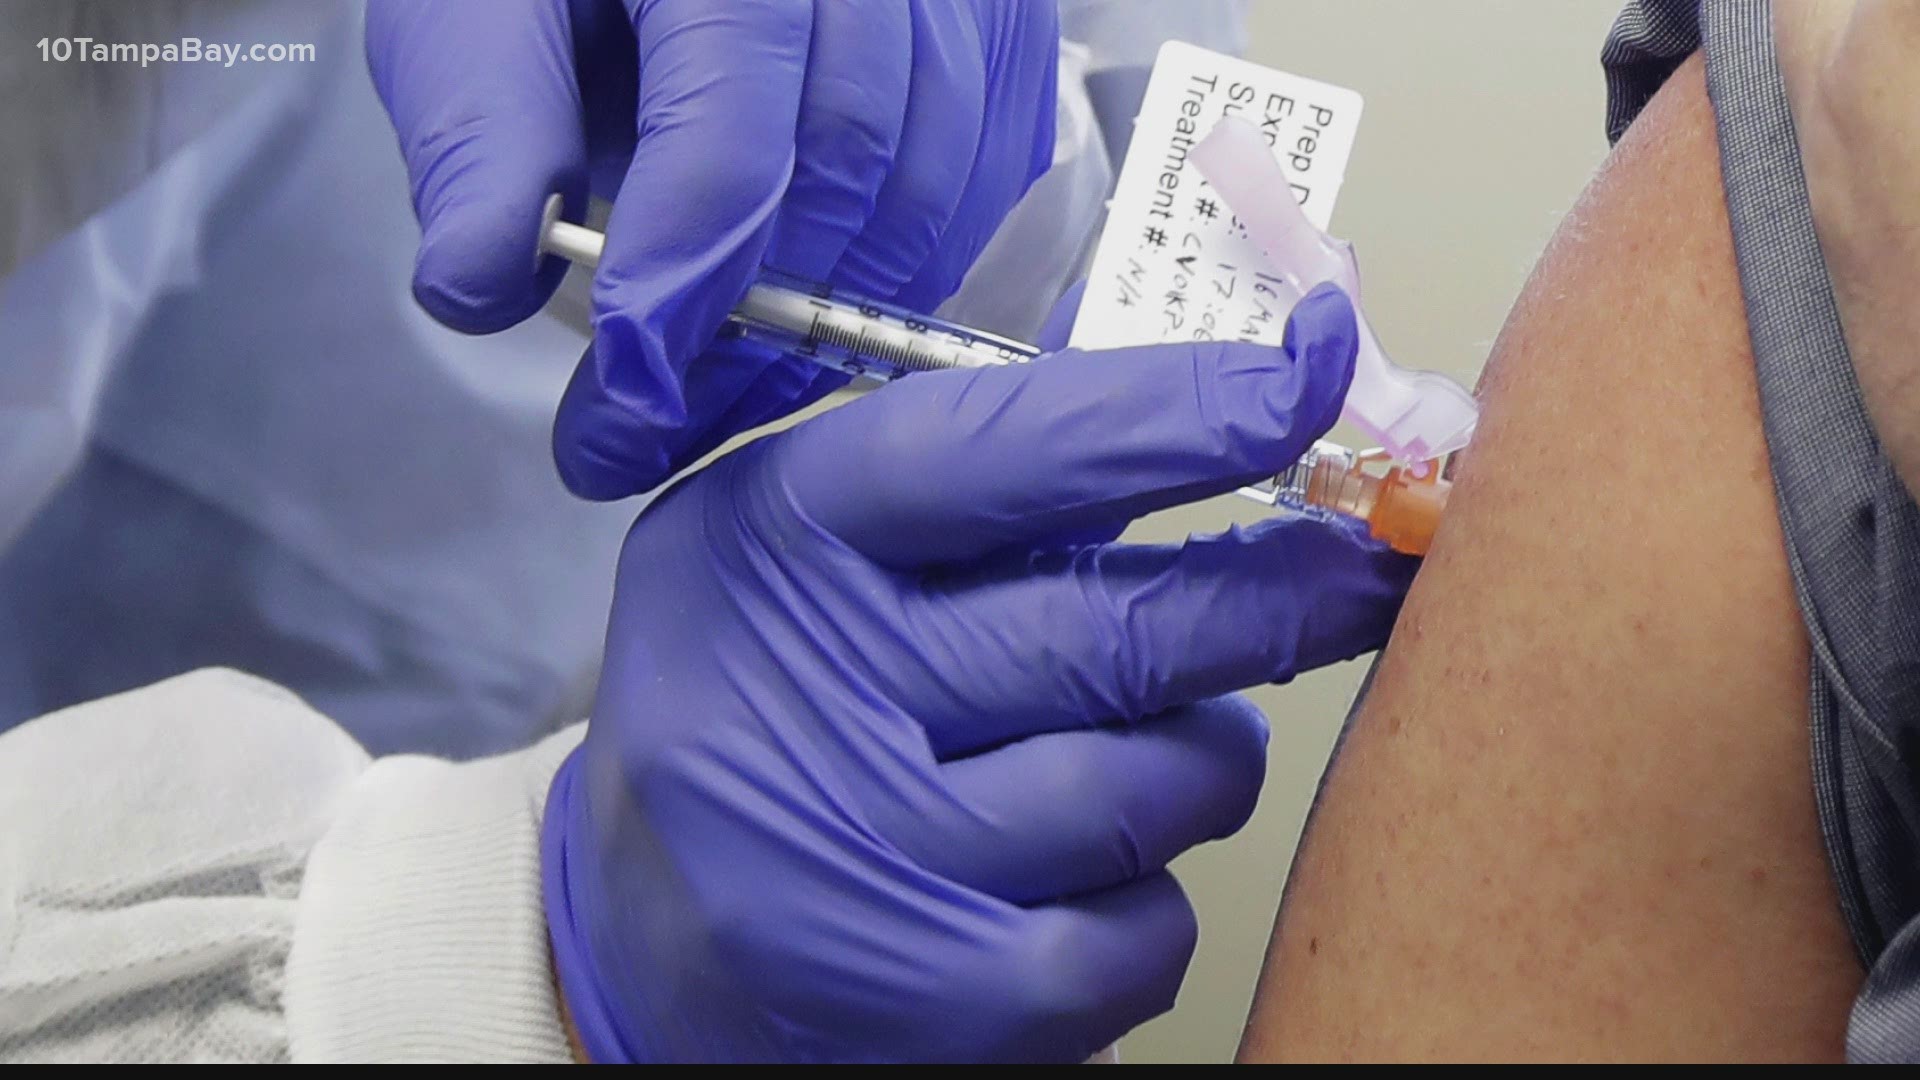 As the delta variant spreads and vaccination rates stall, doctors say it’s possible but rare and the risk of severe symptoms remains low if fully vaccinated.